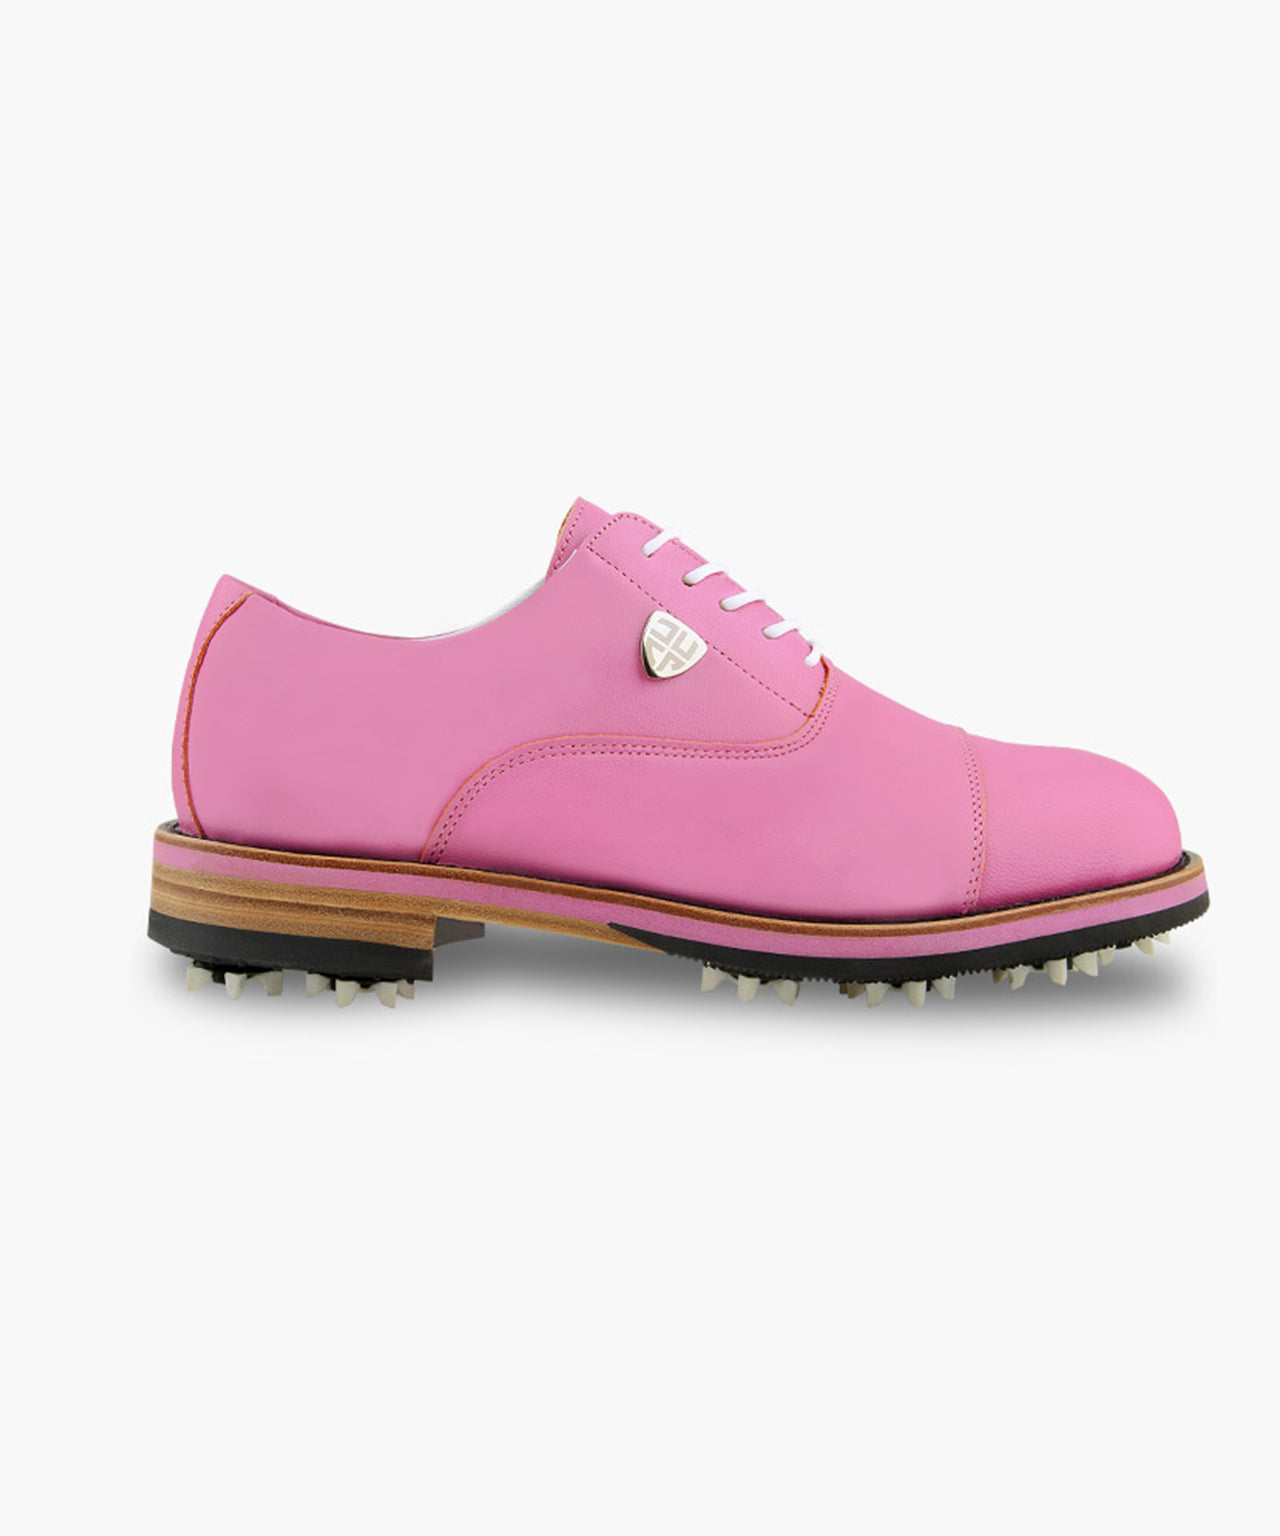 HENRY STUART Icon Classic Spike Golf Shoes - Pink